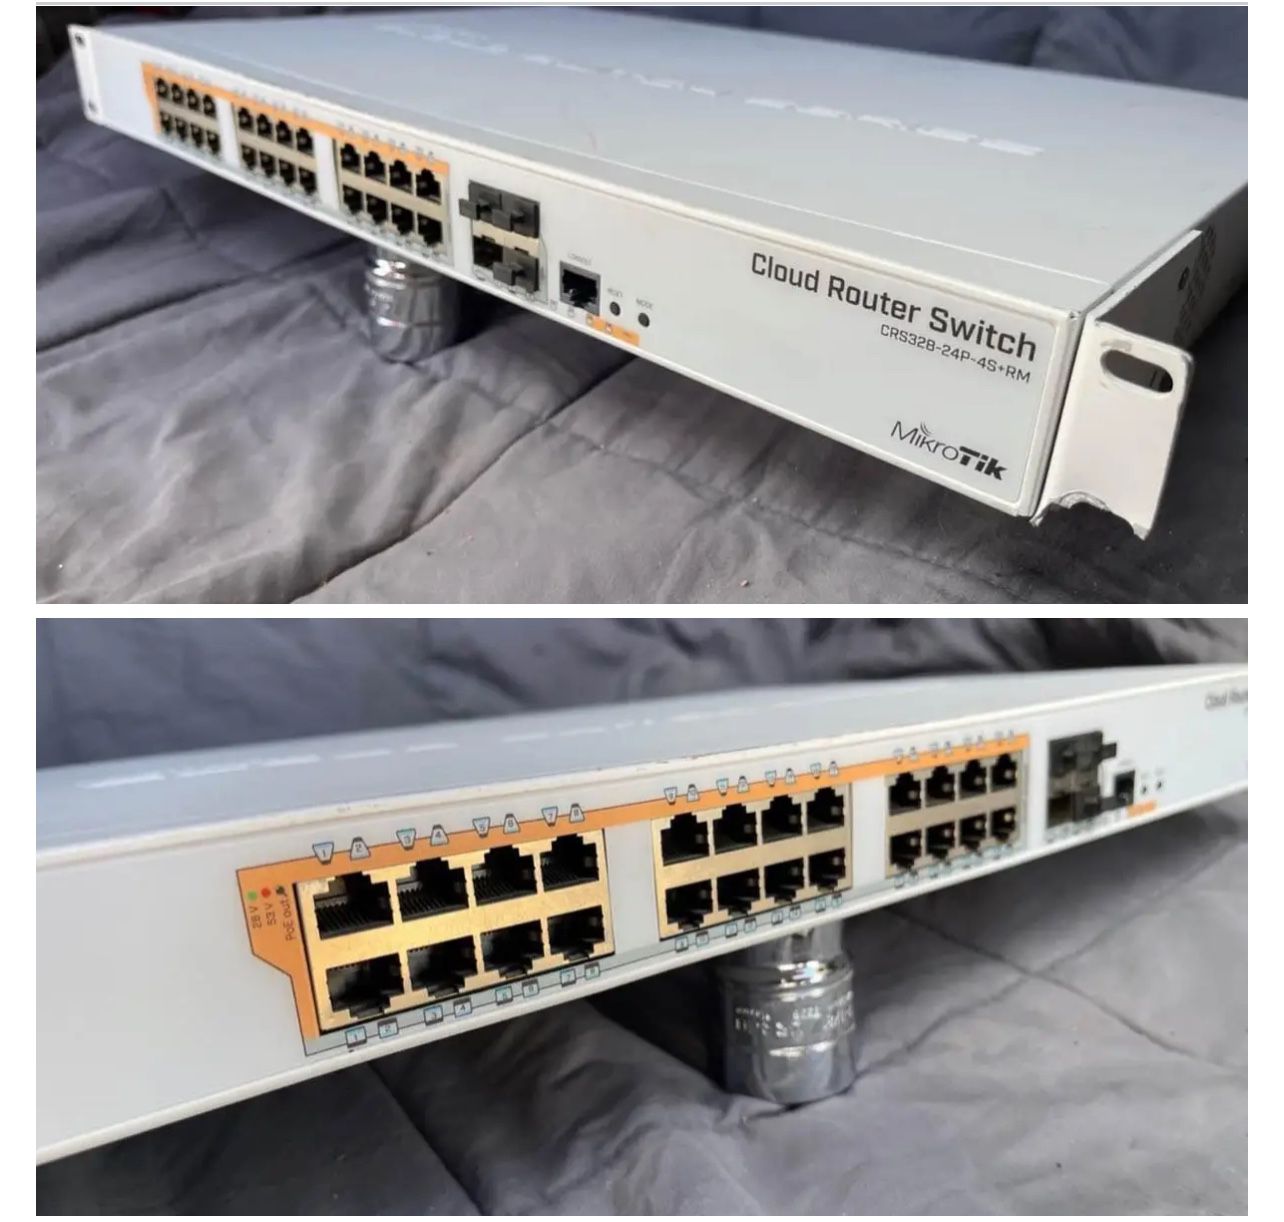 CRS328-24P-4S+RM cloud router switch